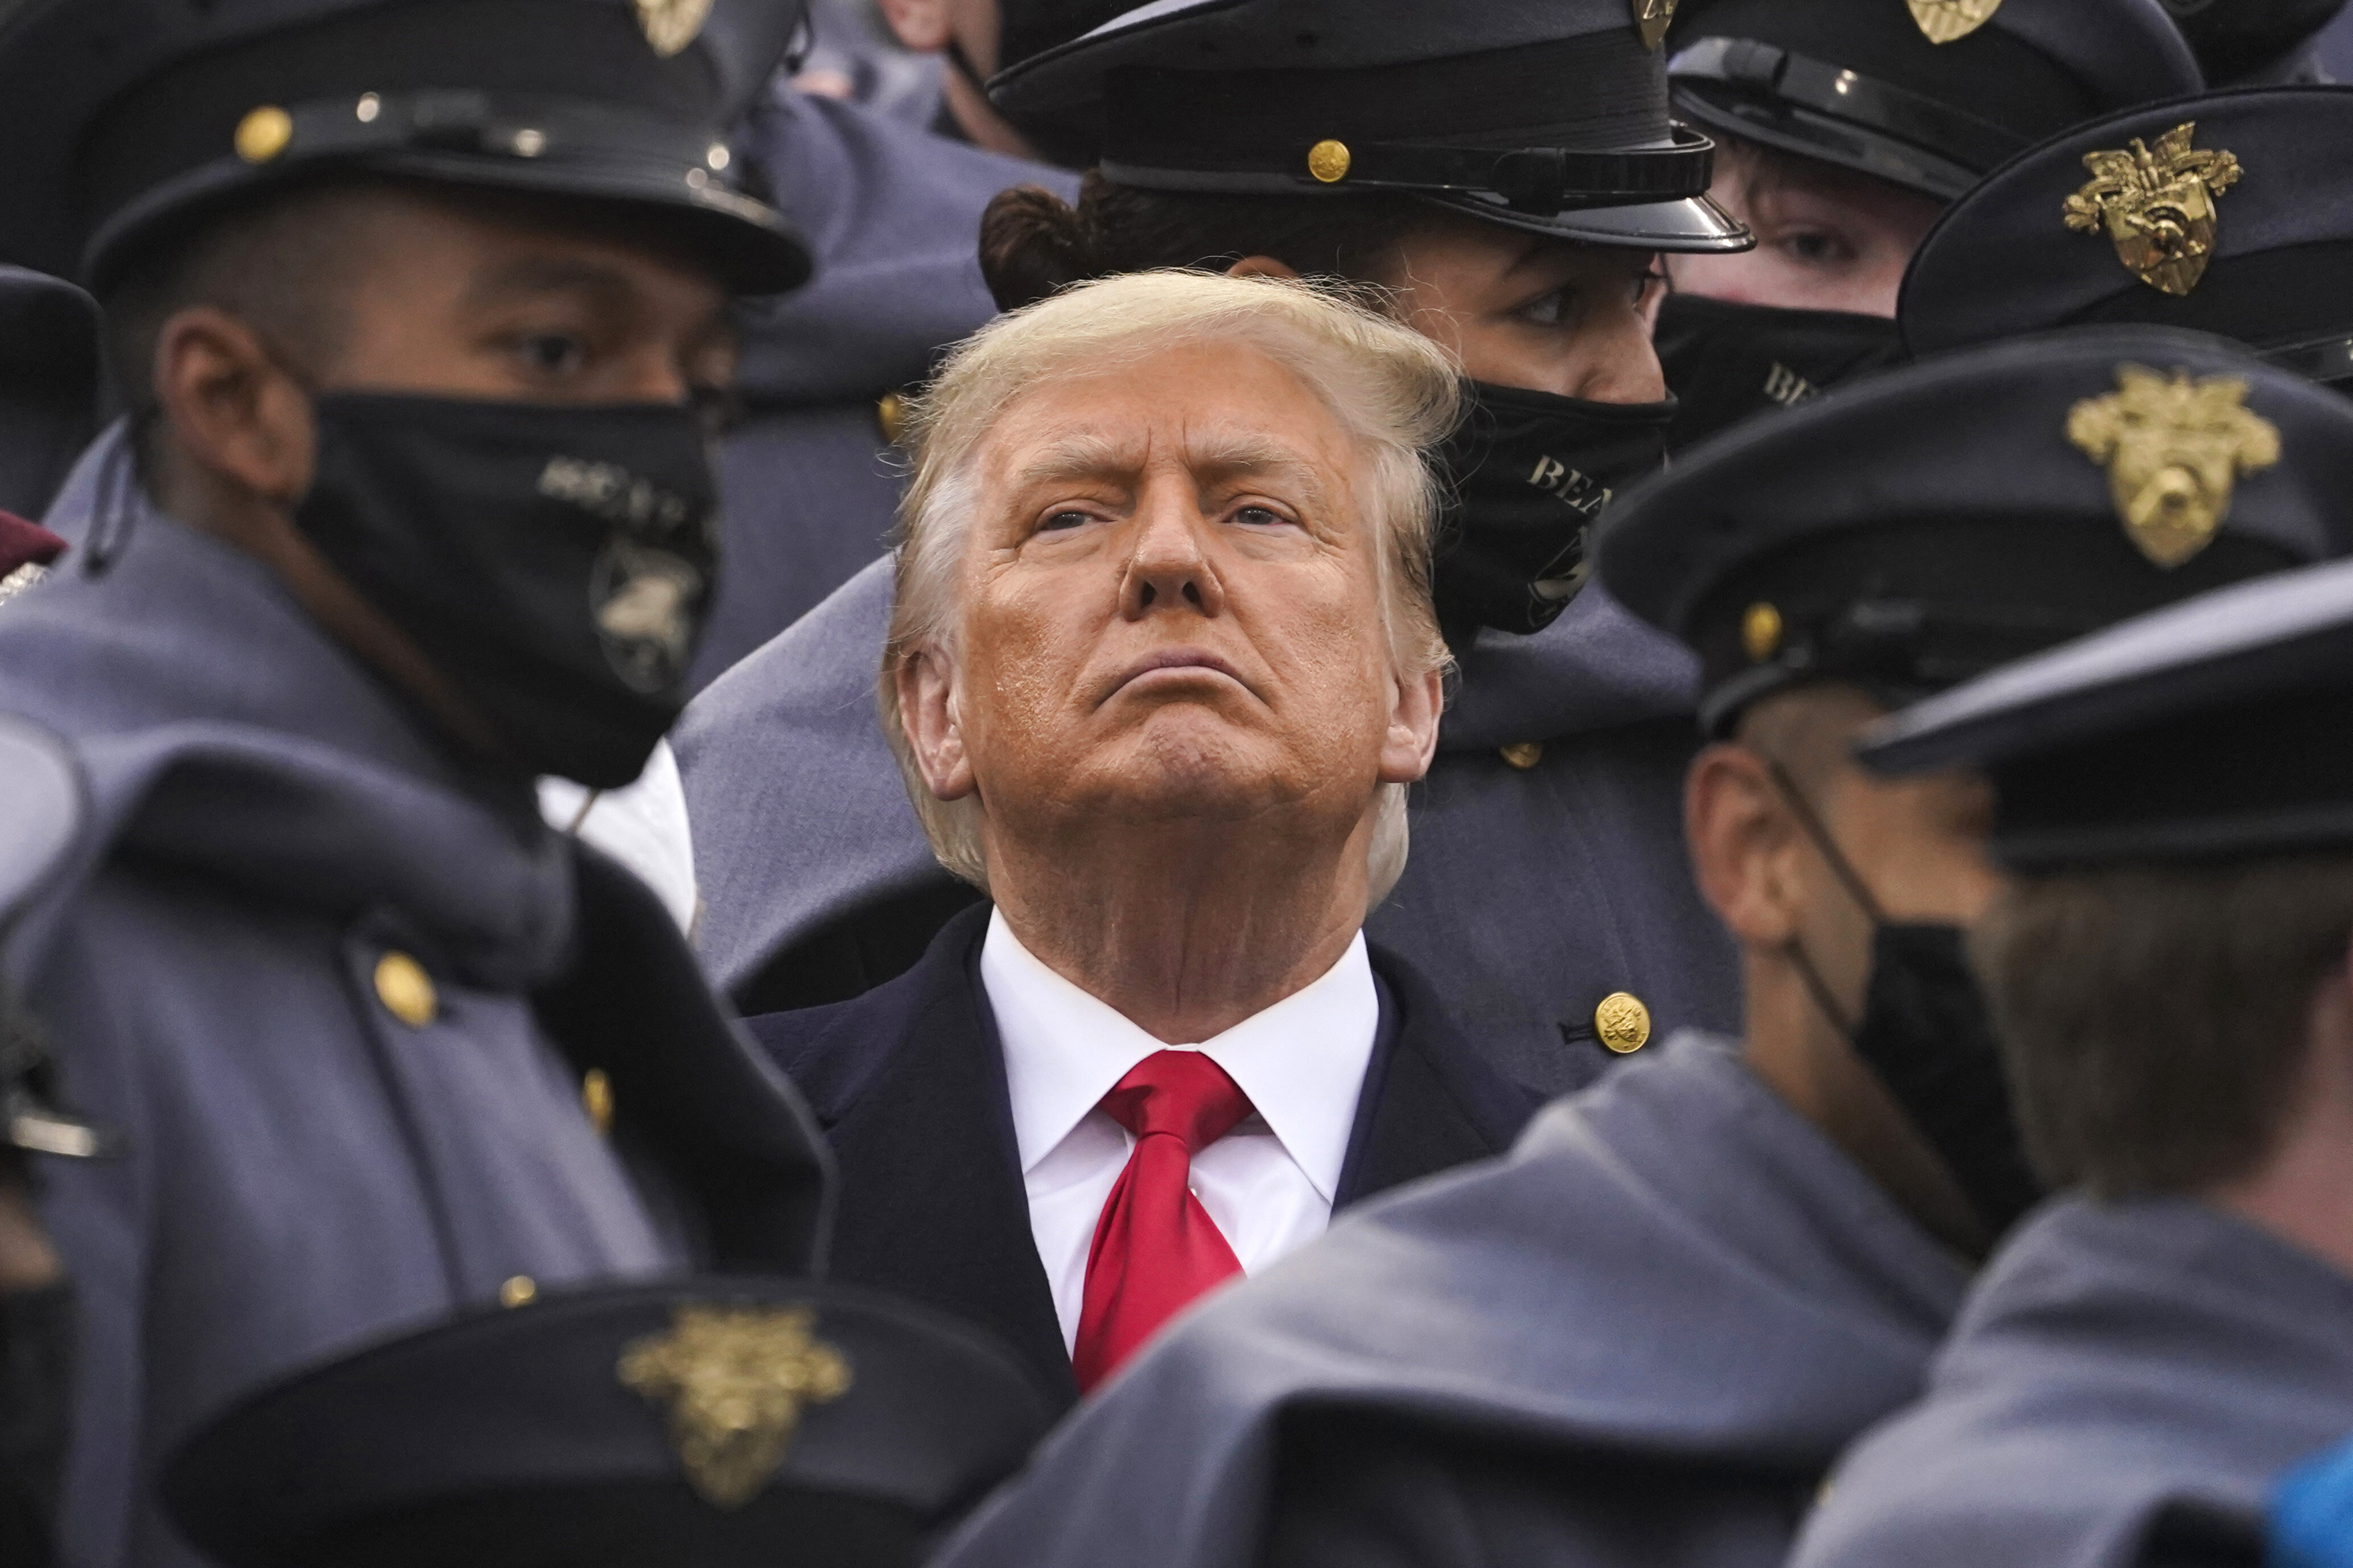 Donald Trump has spoken openly about his plans should he win the presidency, including using the military at the border and in cities struggling with violent crime.